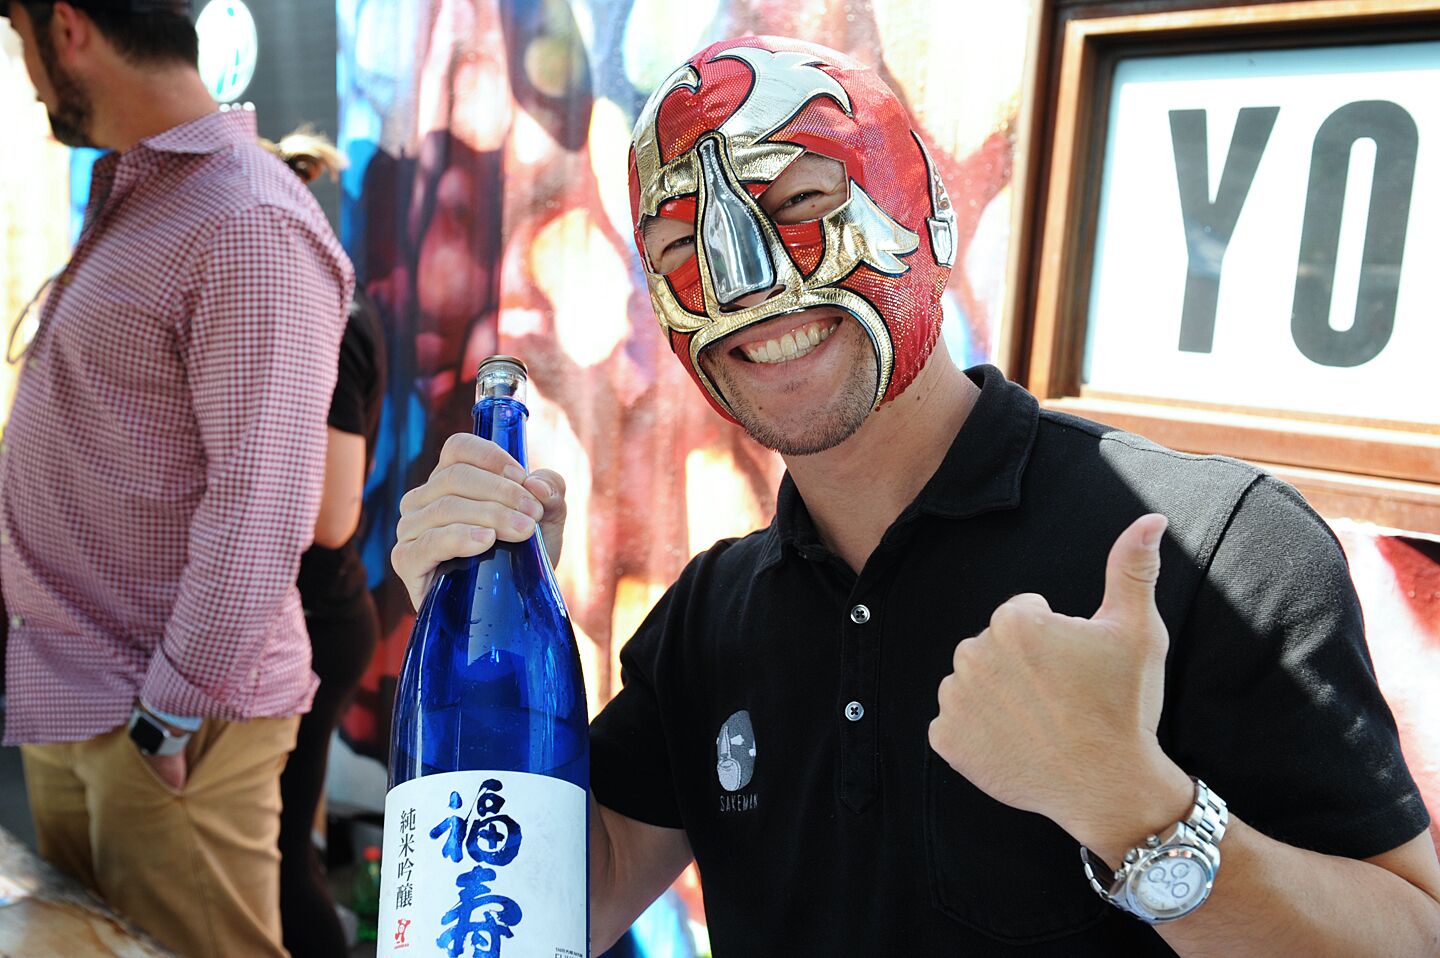 Sake-lovers toasted their good fortune at the San Diego Sake Festival at Quaryard in East Village on Sunday, Sept. 29, 2019.